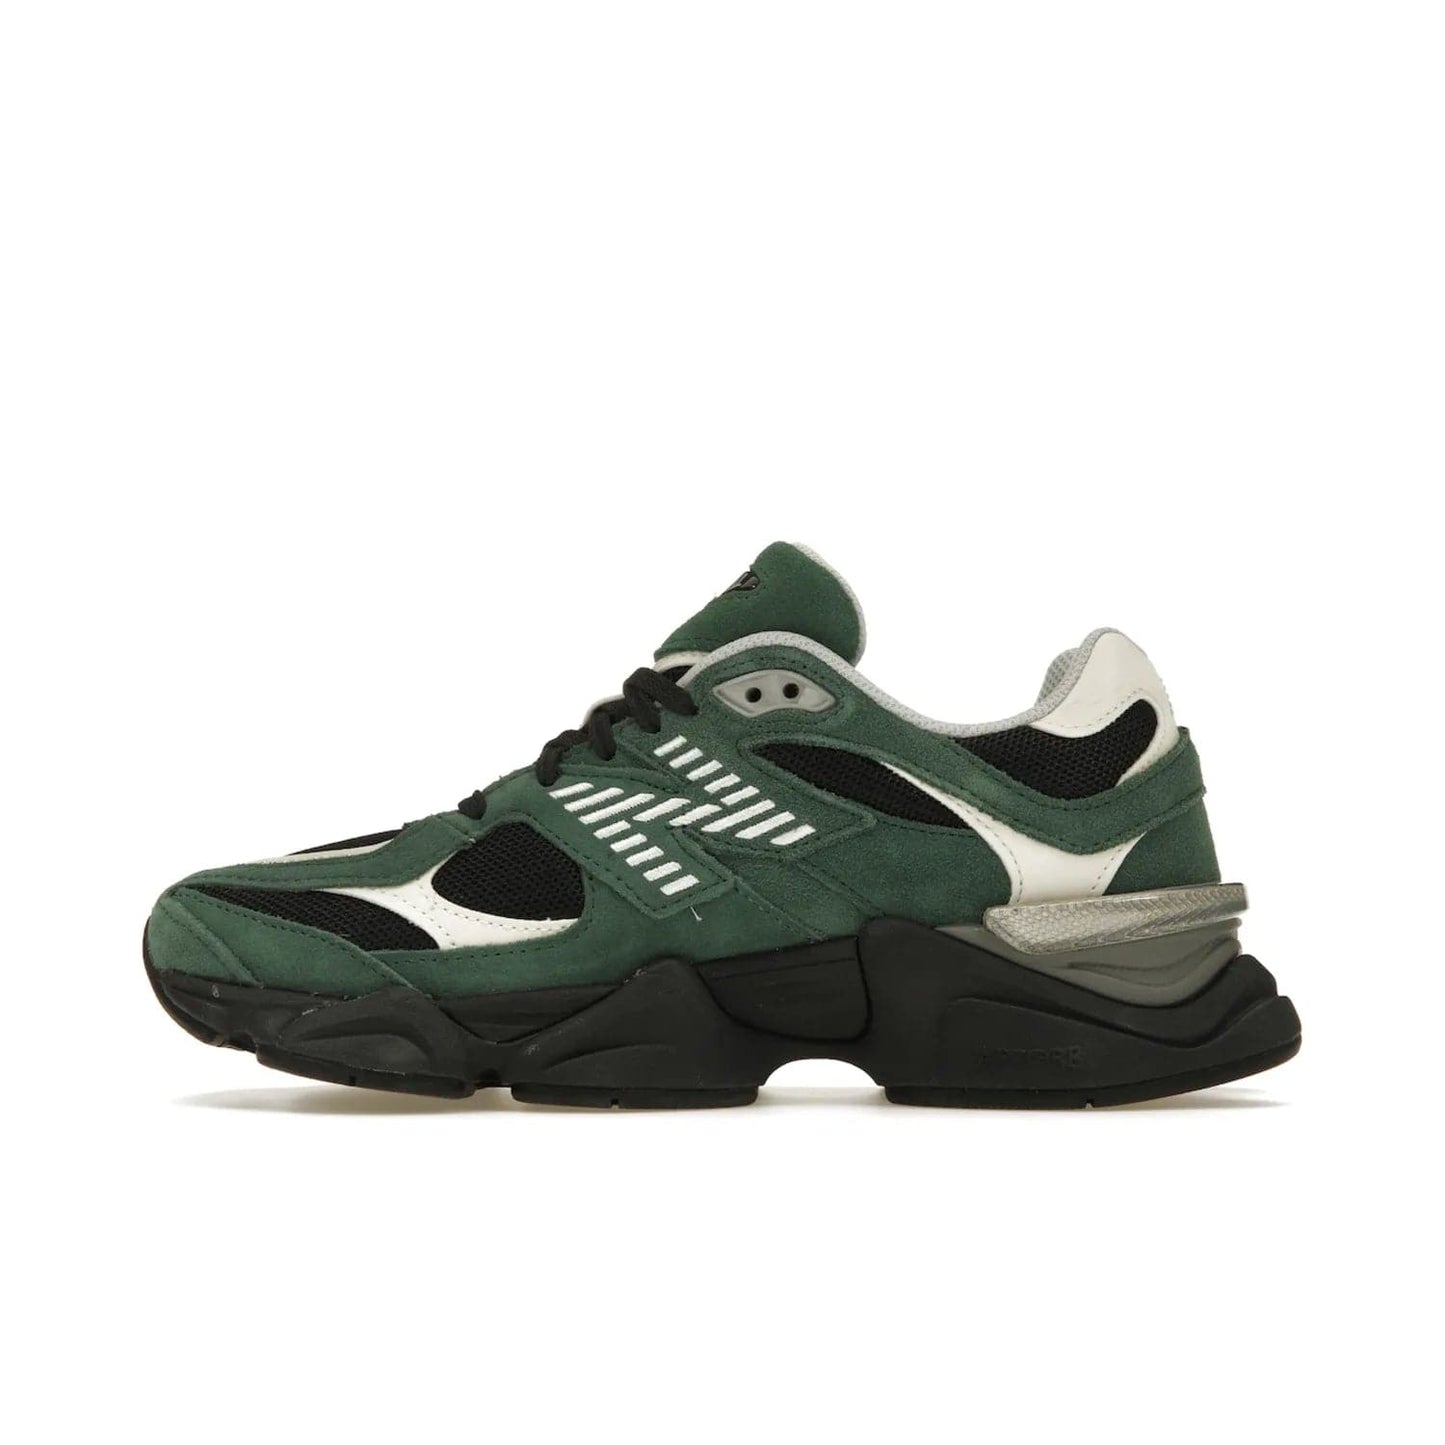 New Balance 9060 Team Forest Green - Image 19 - Only at www.BallersClubKickz.com - Introducing the New Balance 9060 Team Forest Green! Durable statement sneaker with a vibrant forest green upper and contrast detailing. Release date 2023-04-04 - don't miss out!